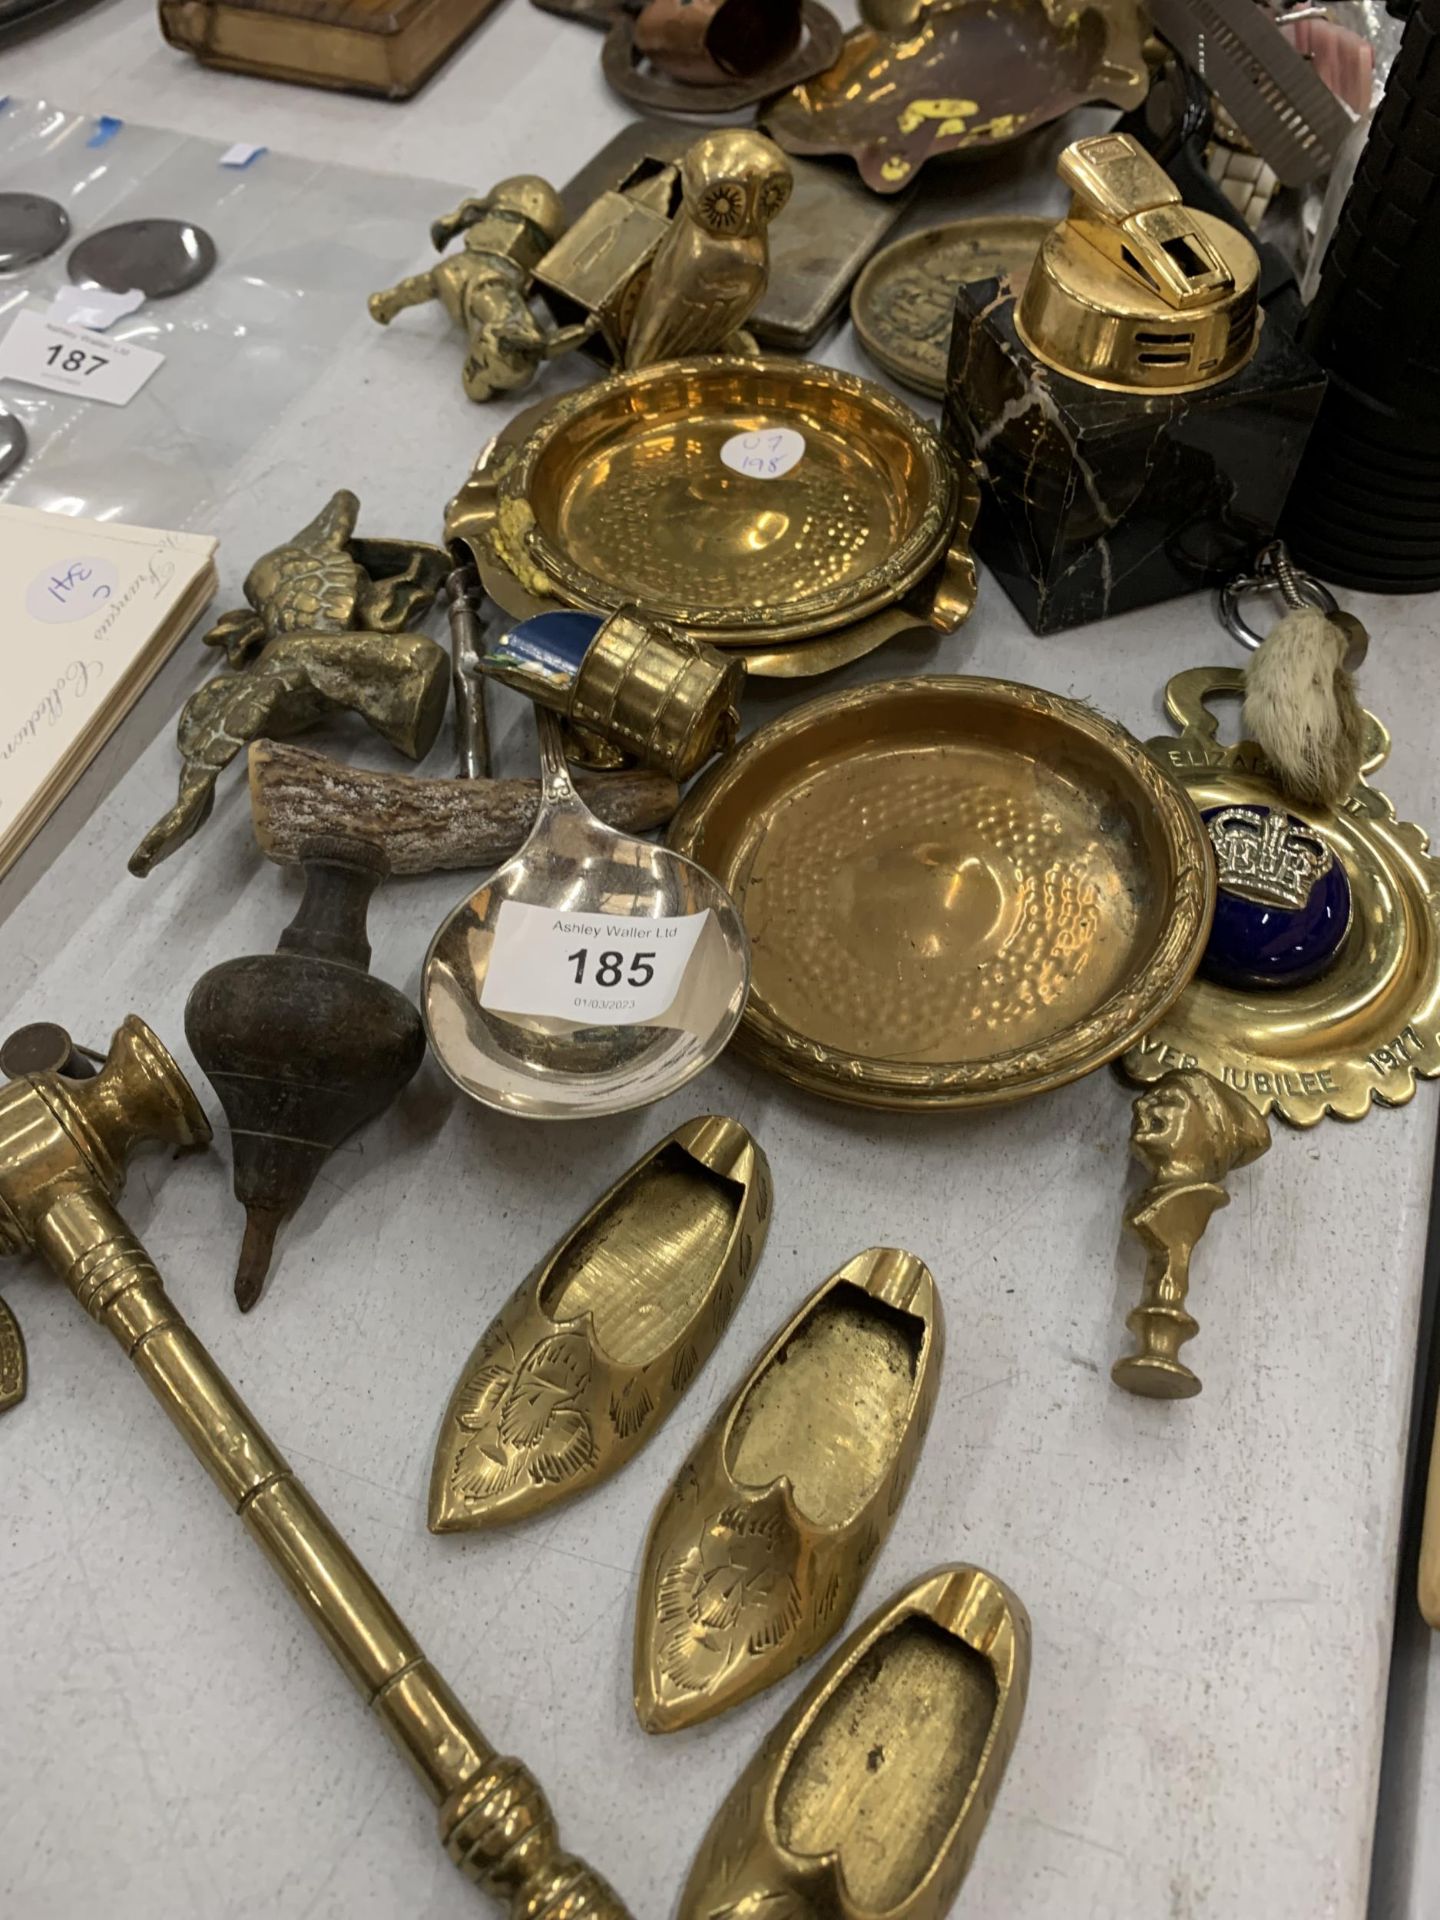 A LARGE COLLECTION OF BRASS ITEMS TO INCLUDE BELLS, FIGURES, ETC PLUS WATCH FACES, A CIGARETTE CASE, - Image 9 of 14